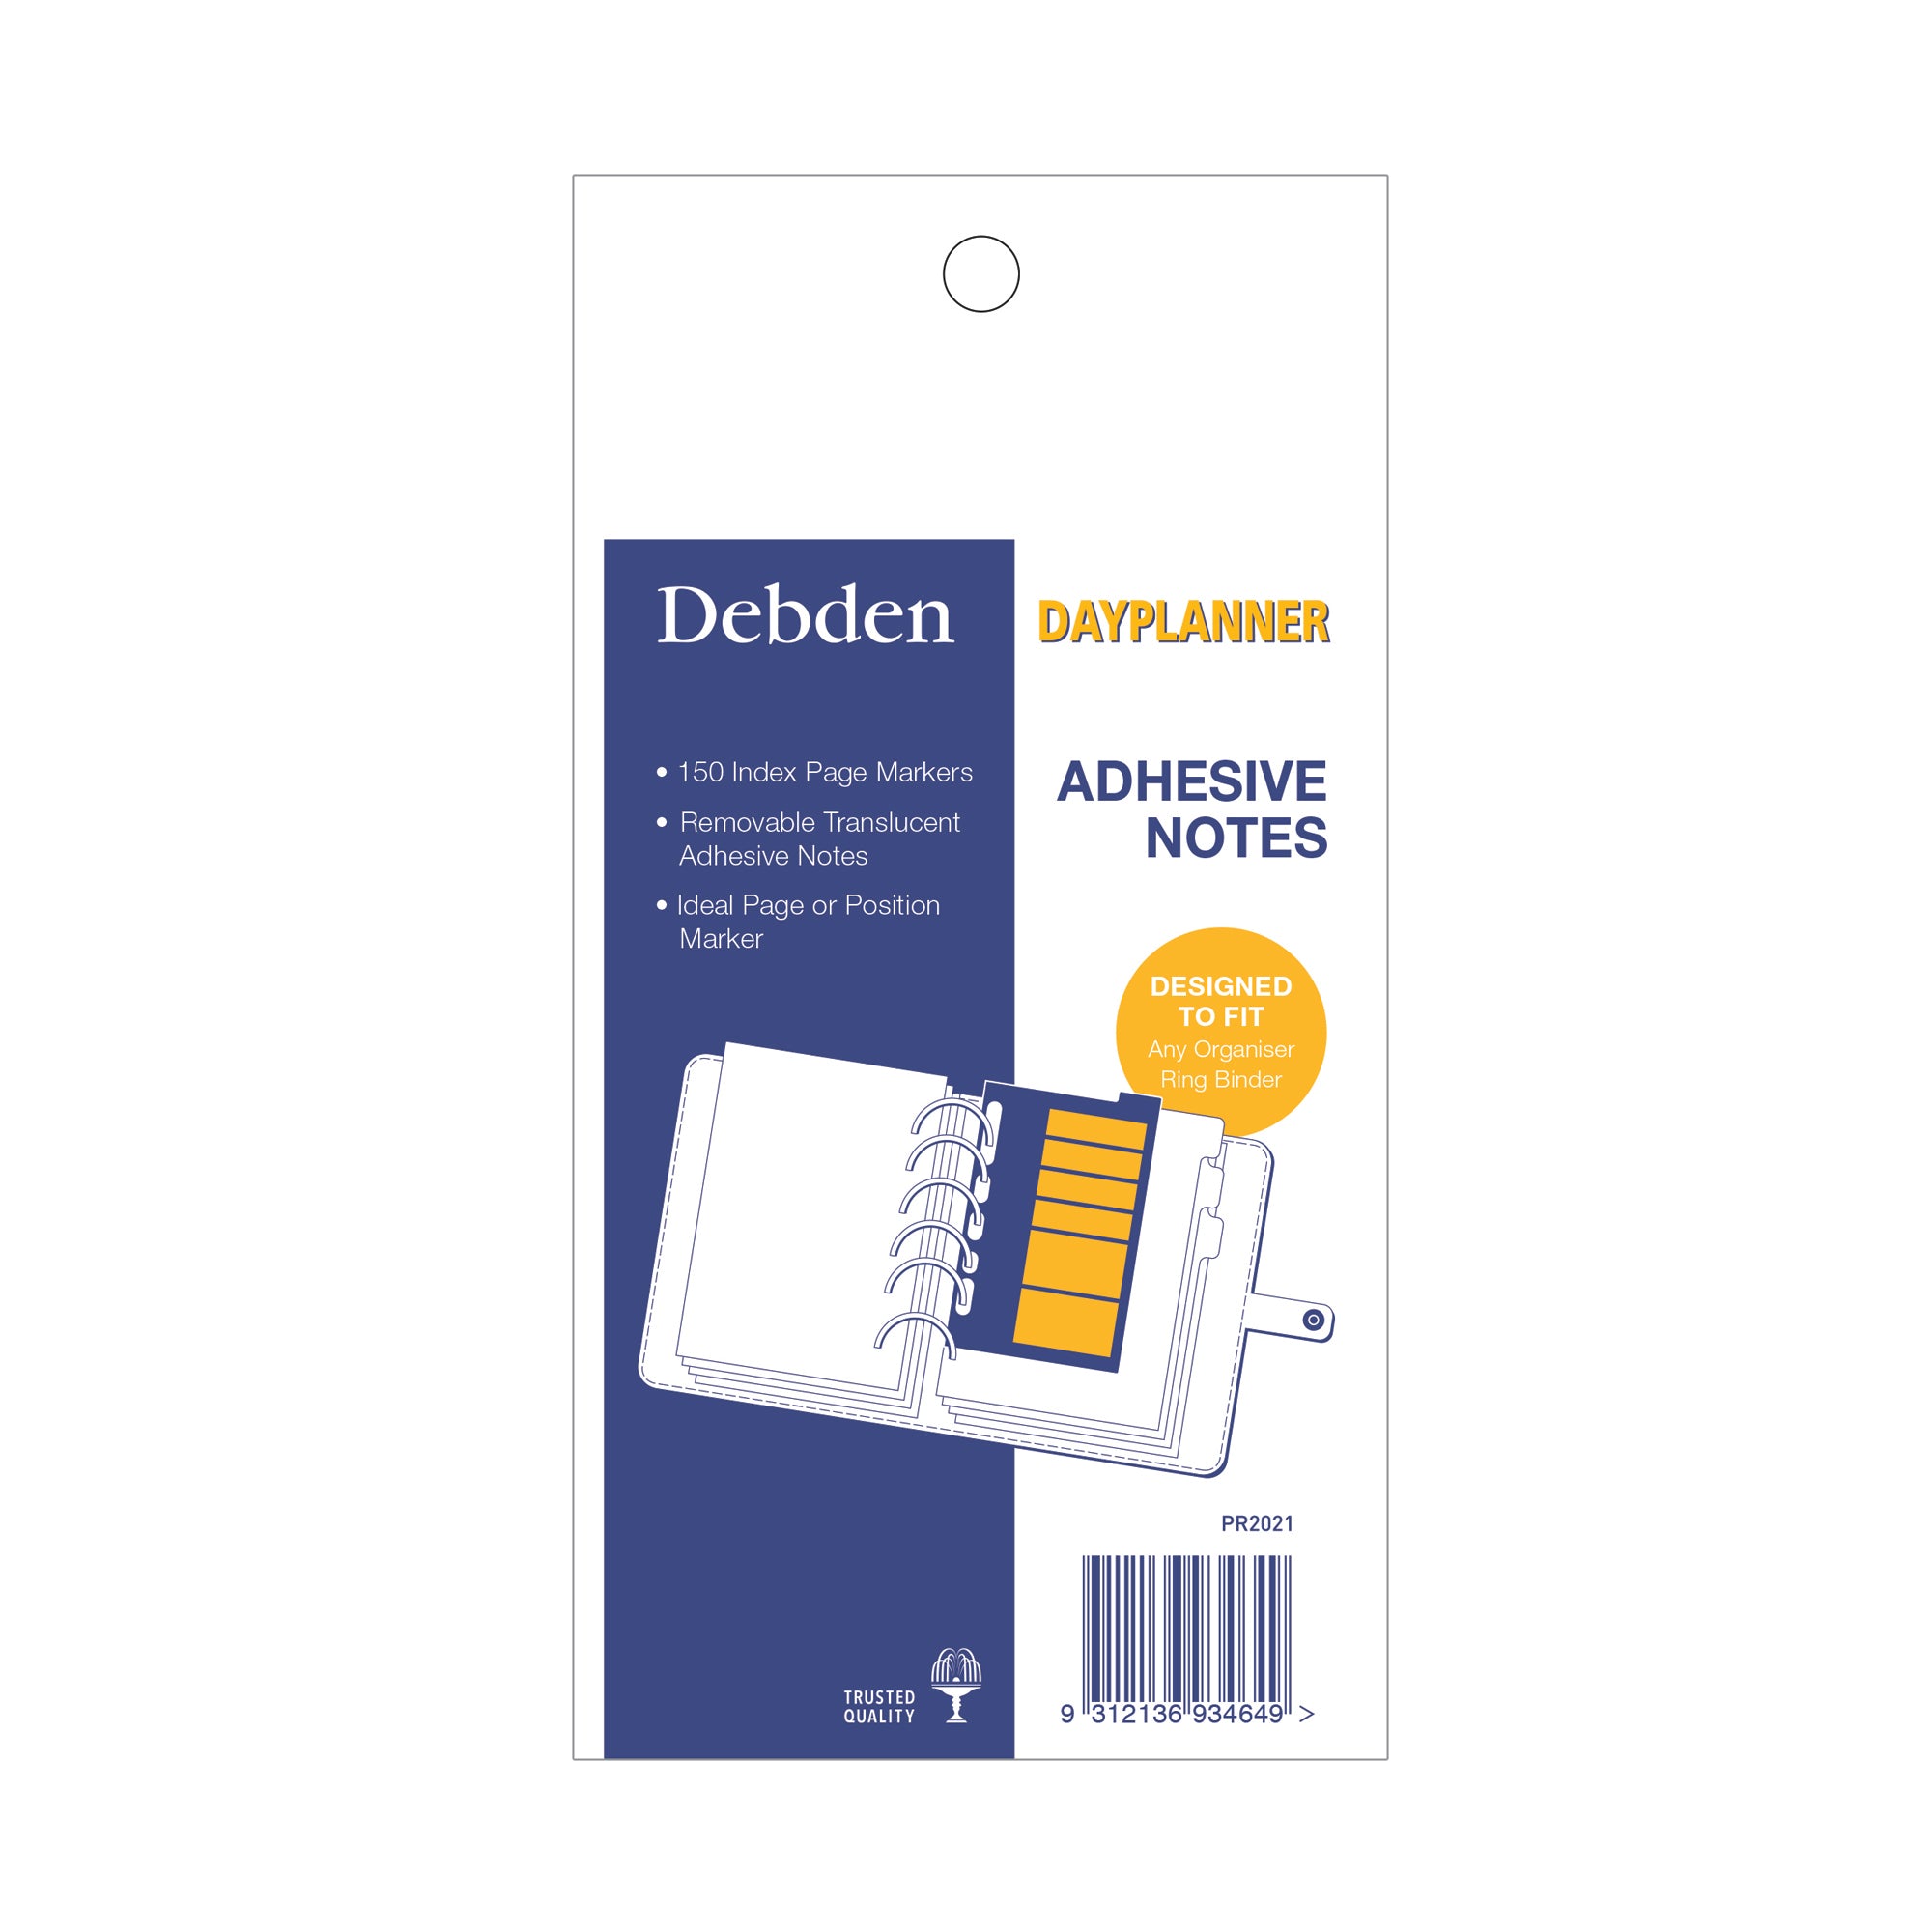 DayPlanner - Personal Size Adhesive notes - Collins Debden